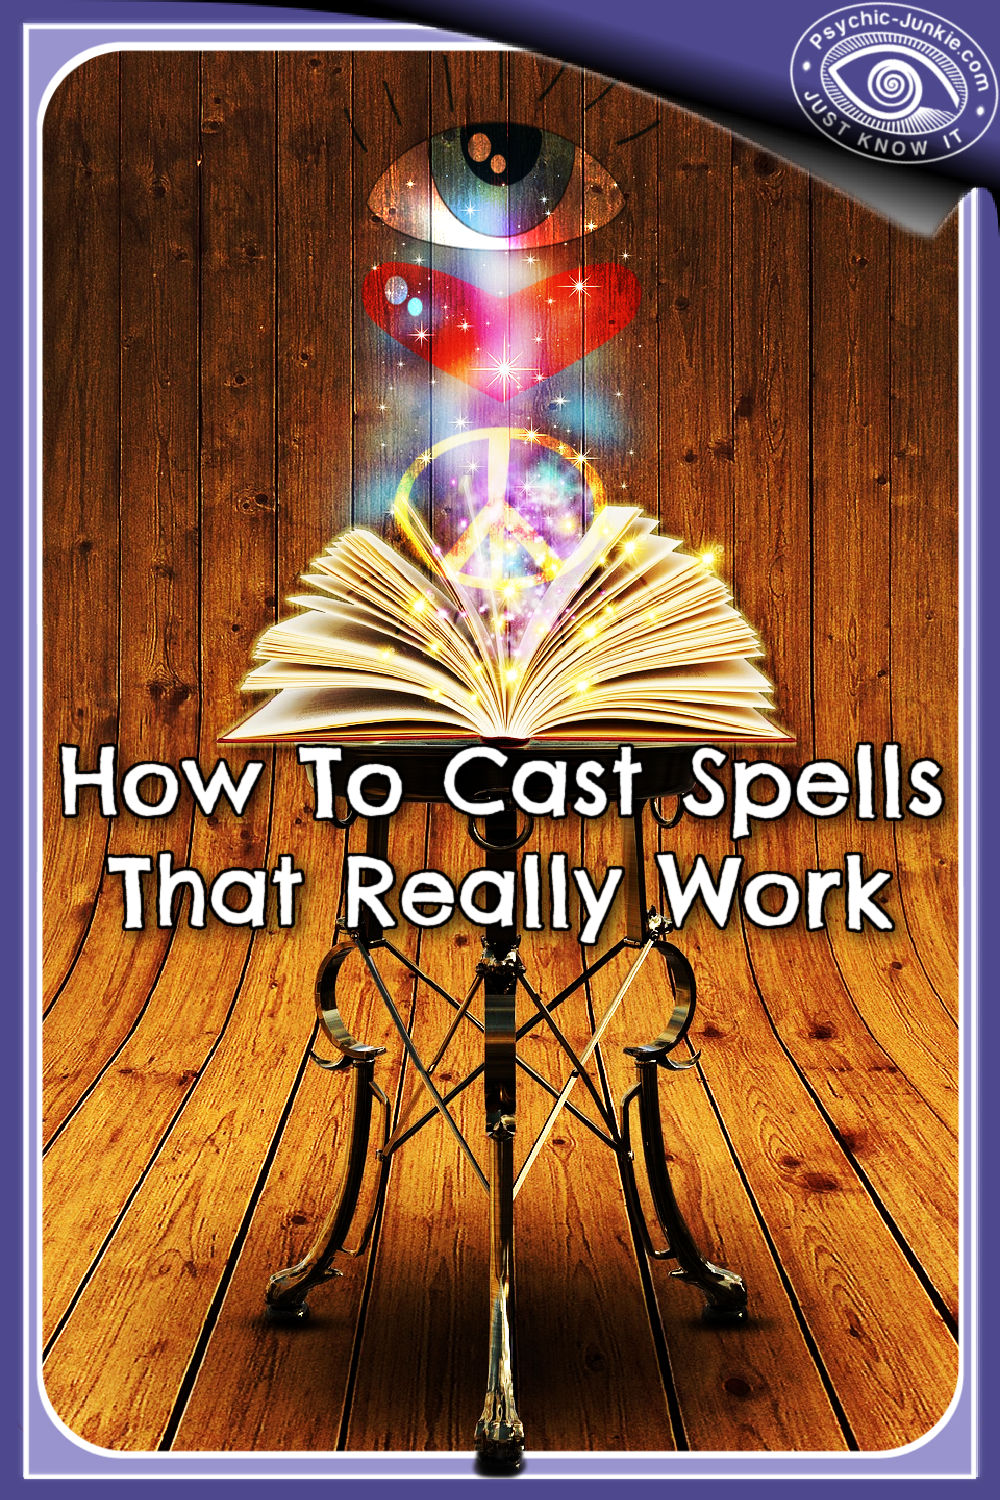 How To Cast Real Spells Safely And Successfully